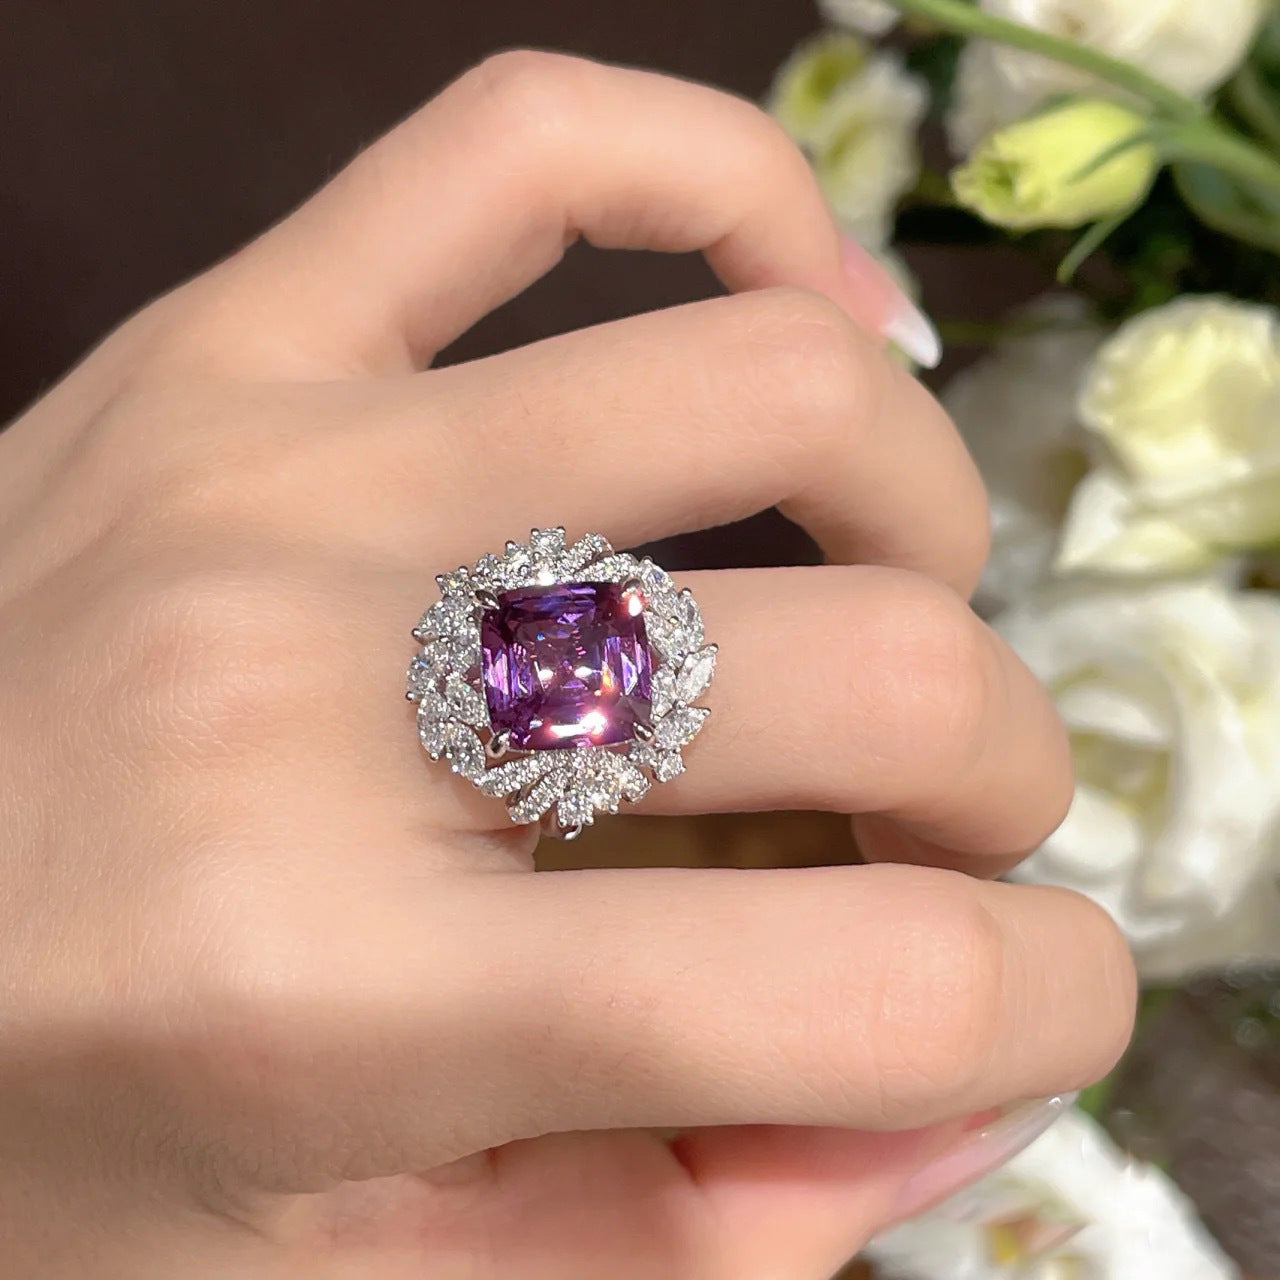 A woman's hand holding a purple Stand out Beautiful Amethyst Gemstone Ring For Women I NEED IT and diamond ring by Maramalive™.